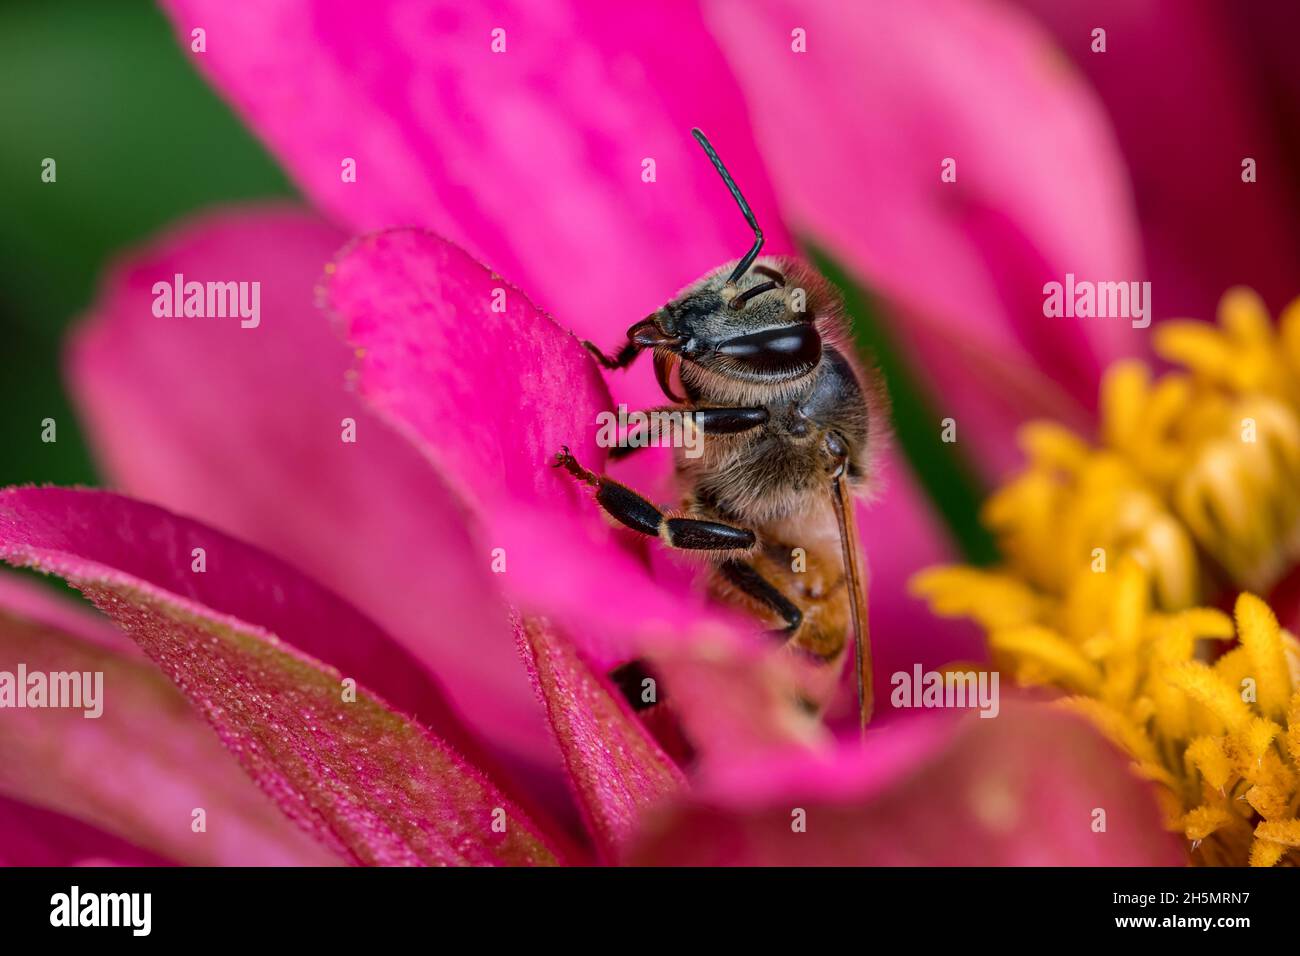 Honeybee on flower. Insect and wildlife conservation, habitat preservation, and backyard flower garden concept Stock Photo